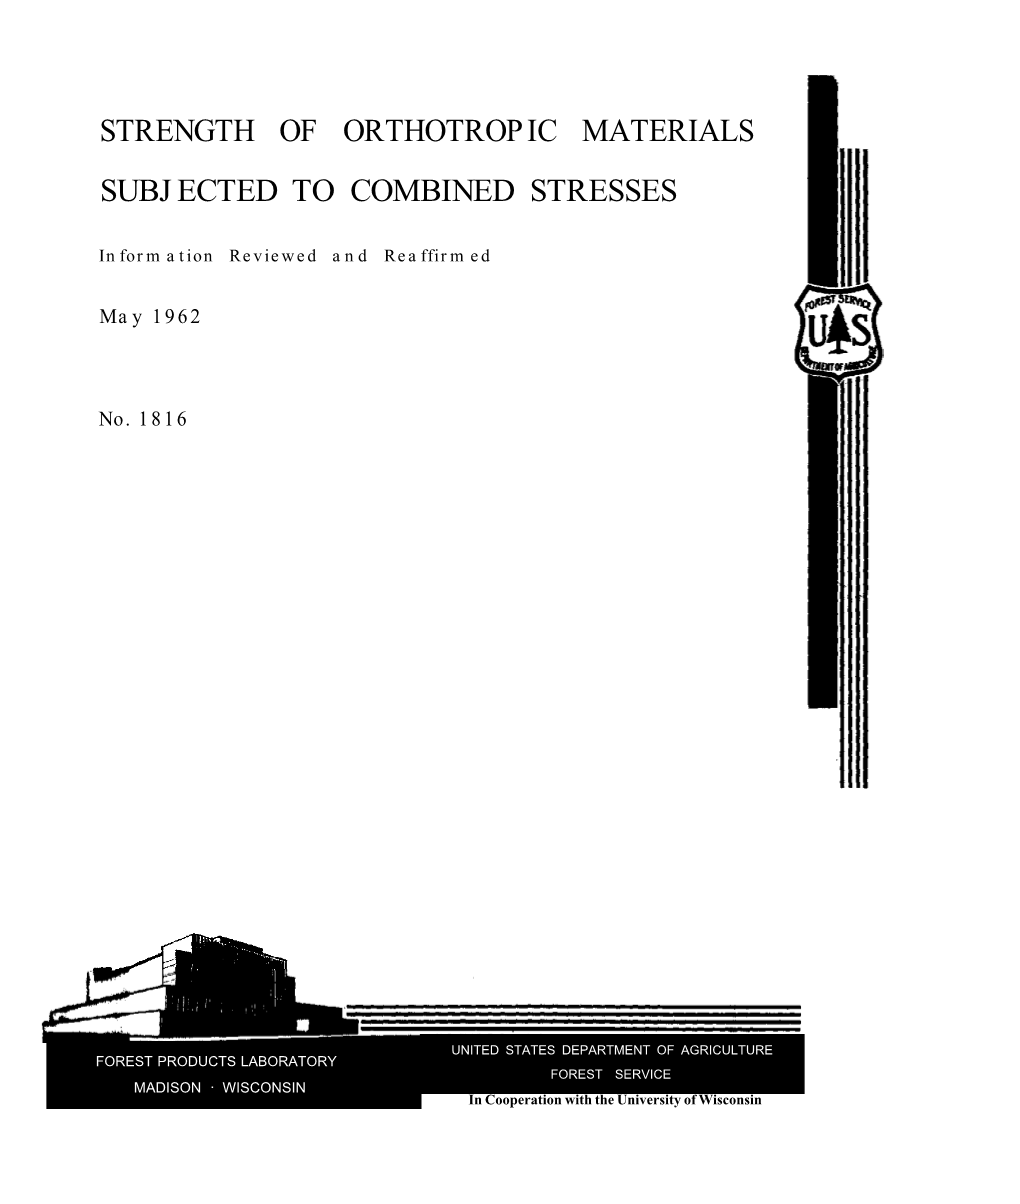 Strength of Orthotropic Materials Subjected to Combined Stresses